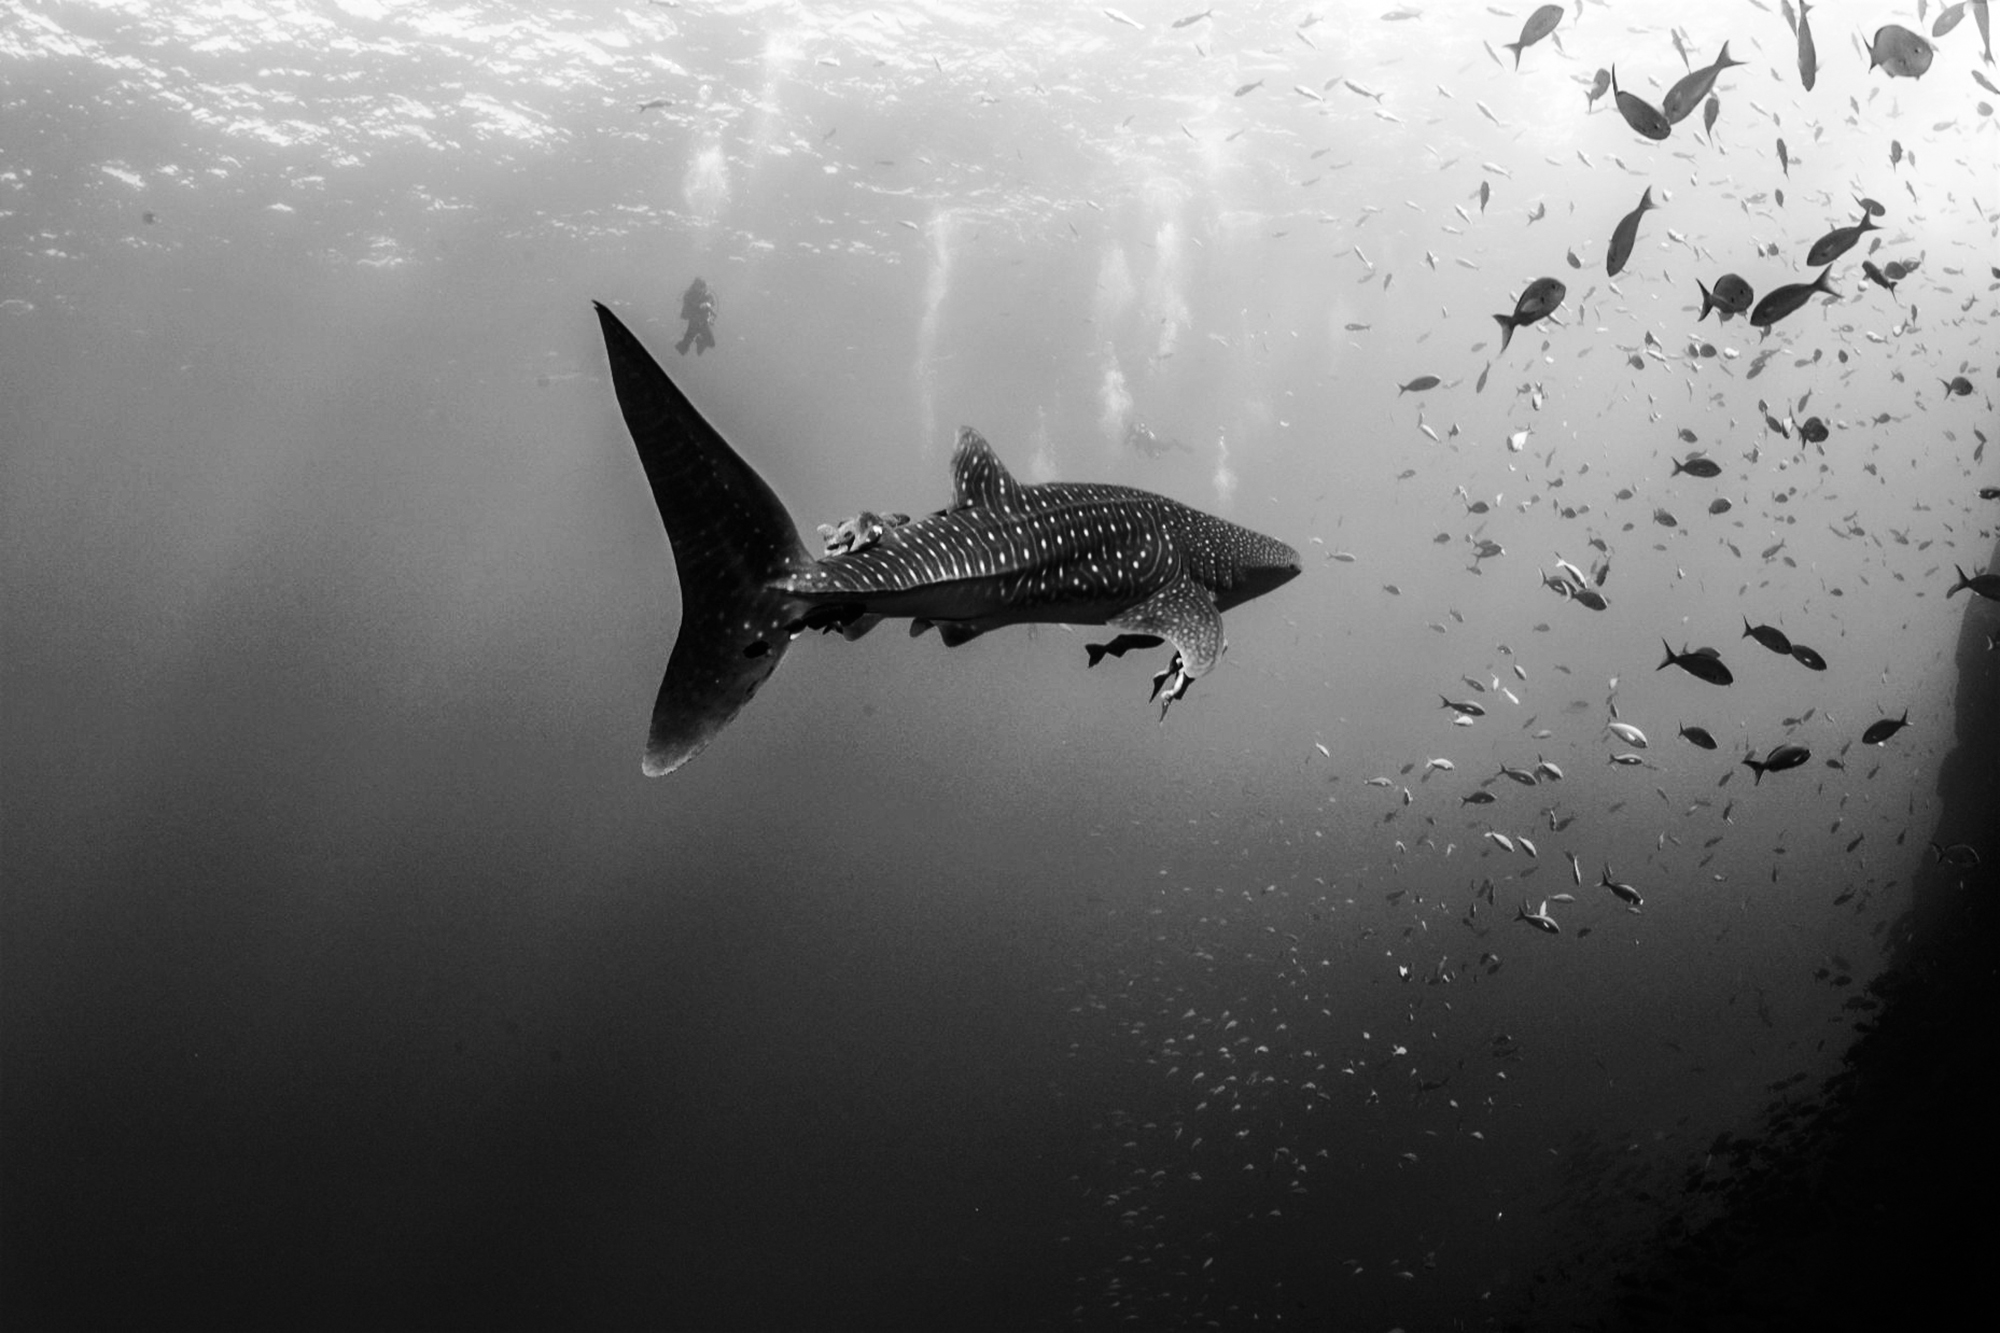 A beautiful whale shark spotted in Socorro. Photo by Kim Nilsson Davidsson